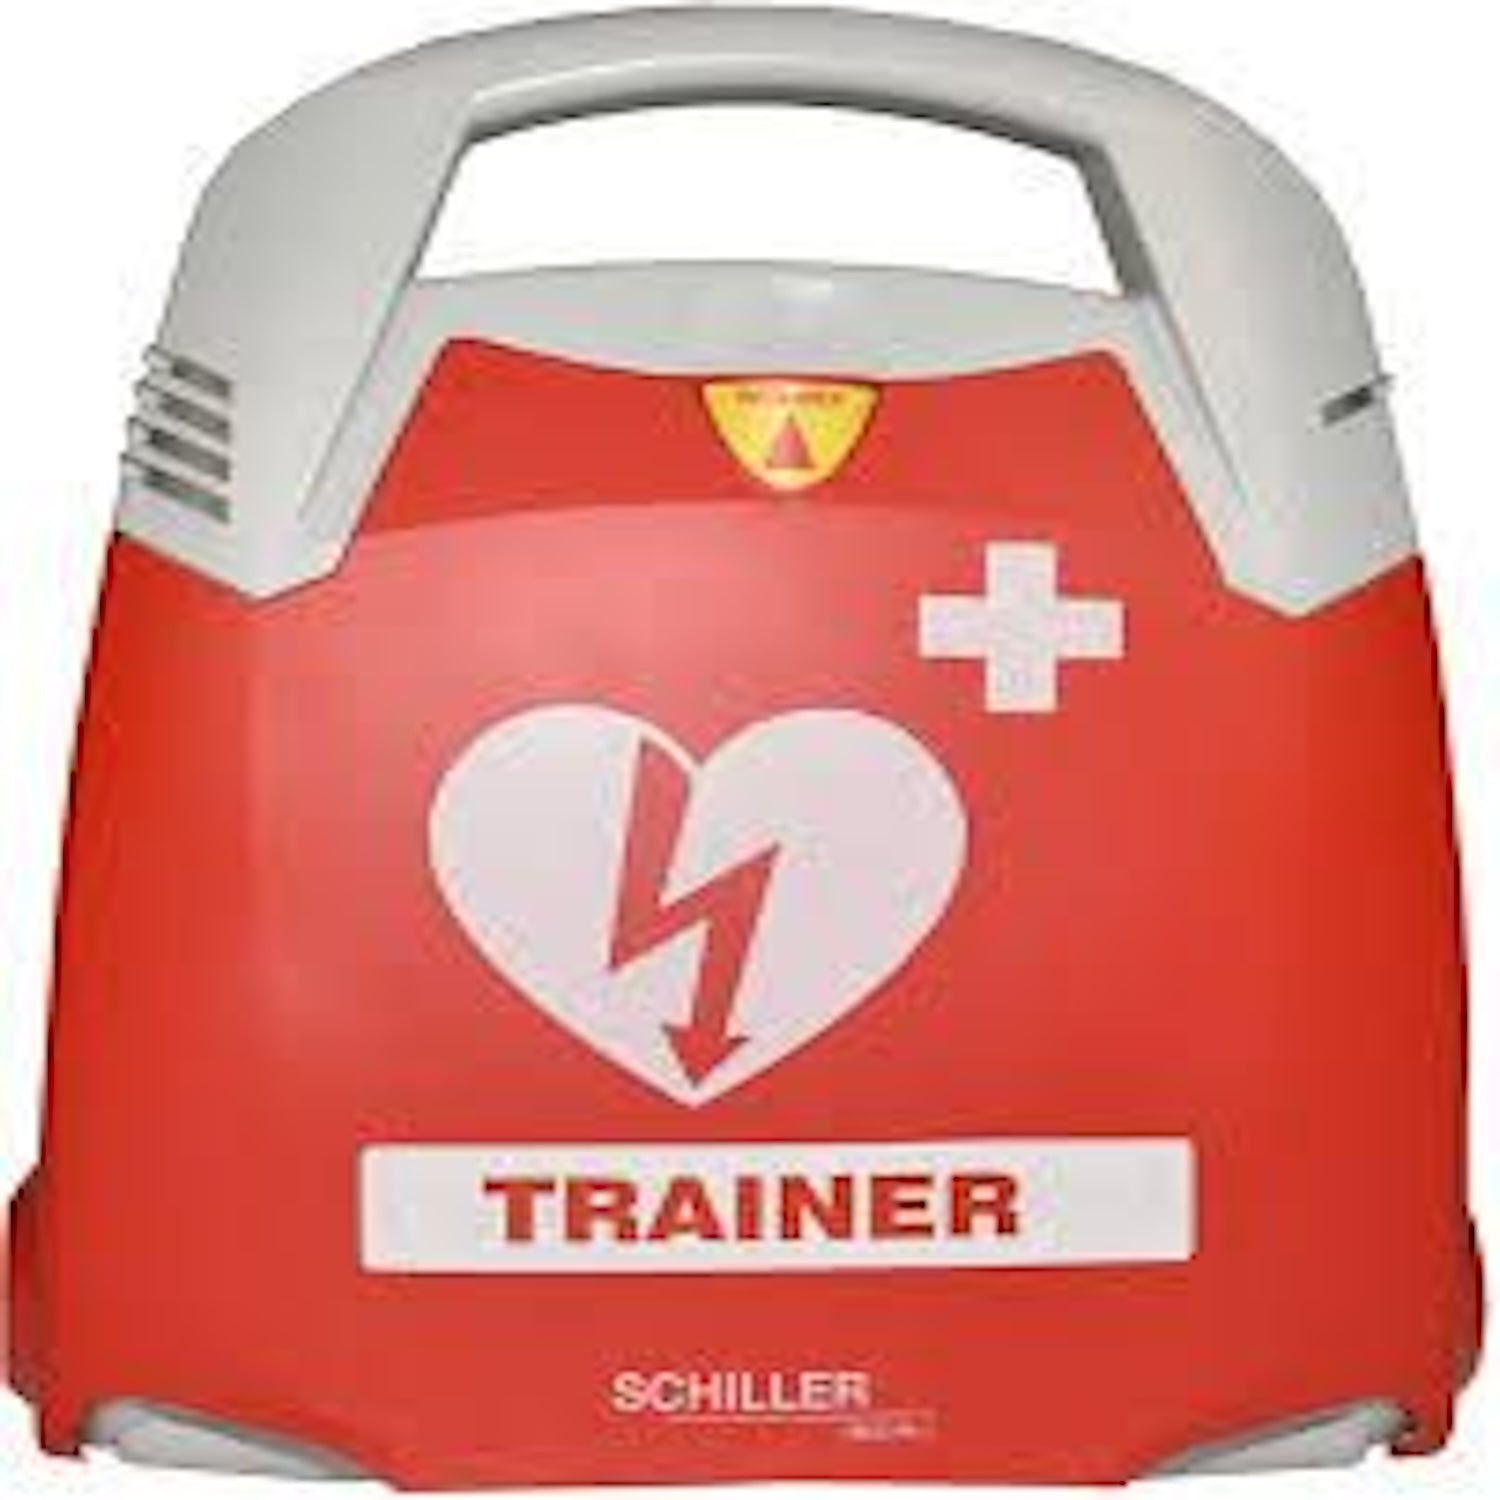 FRED PA-1 Trainer AED Fully & Semi Automatic Modes